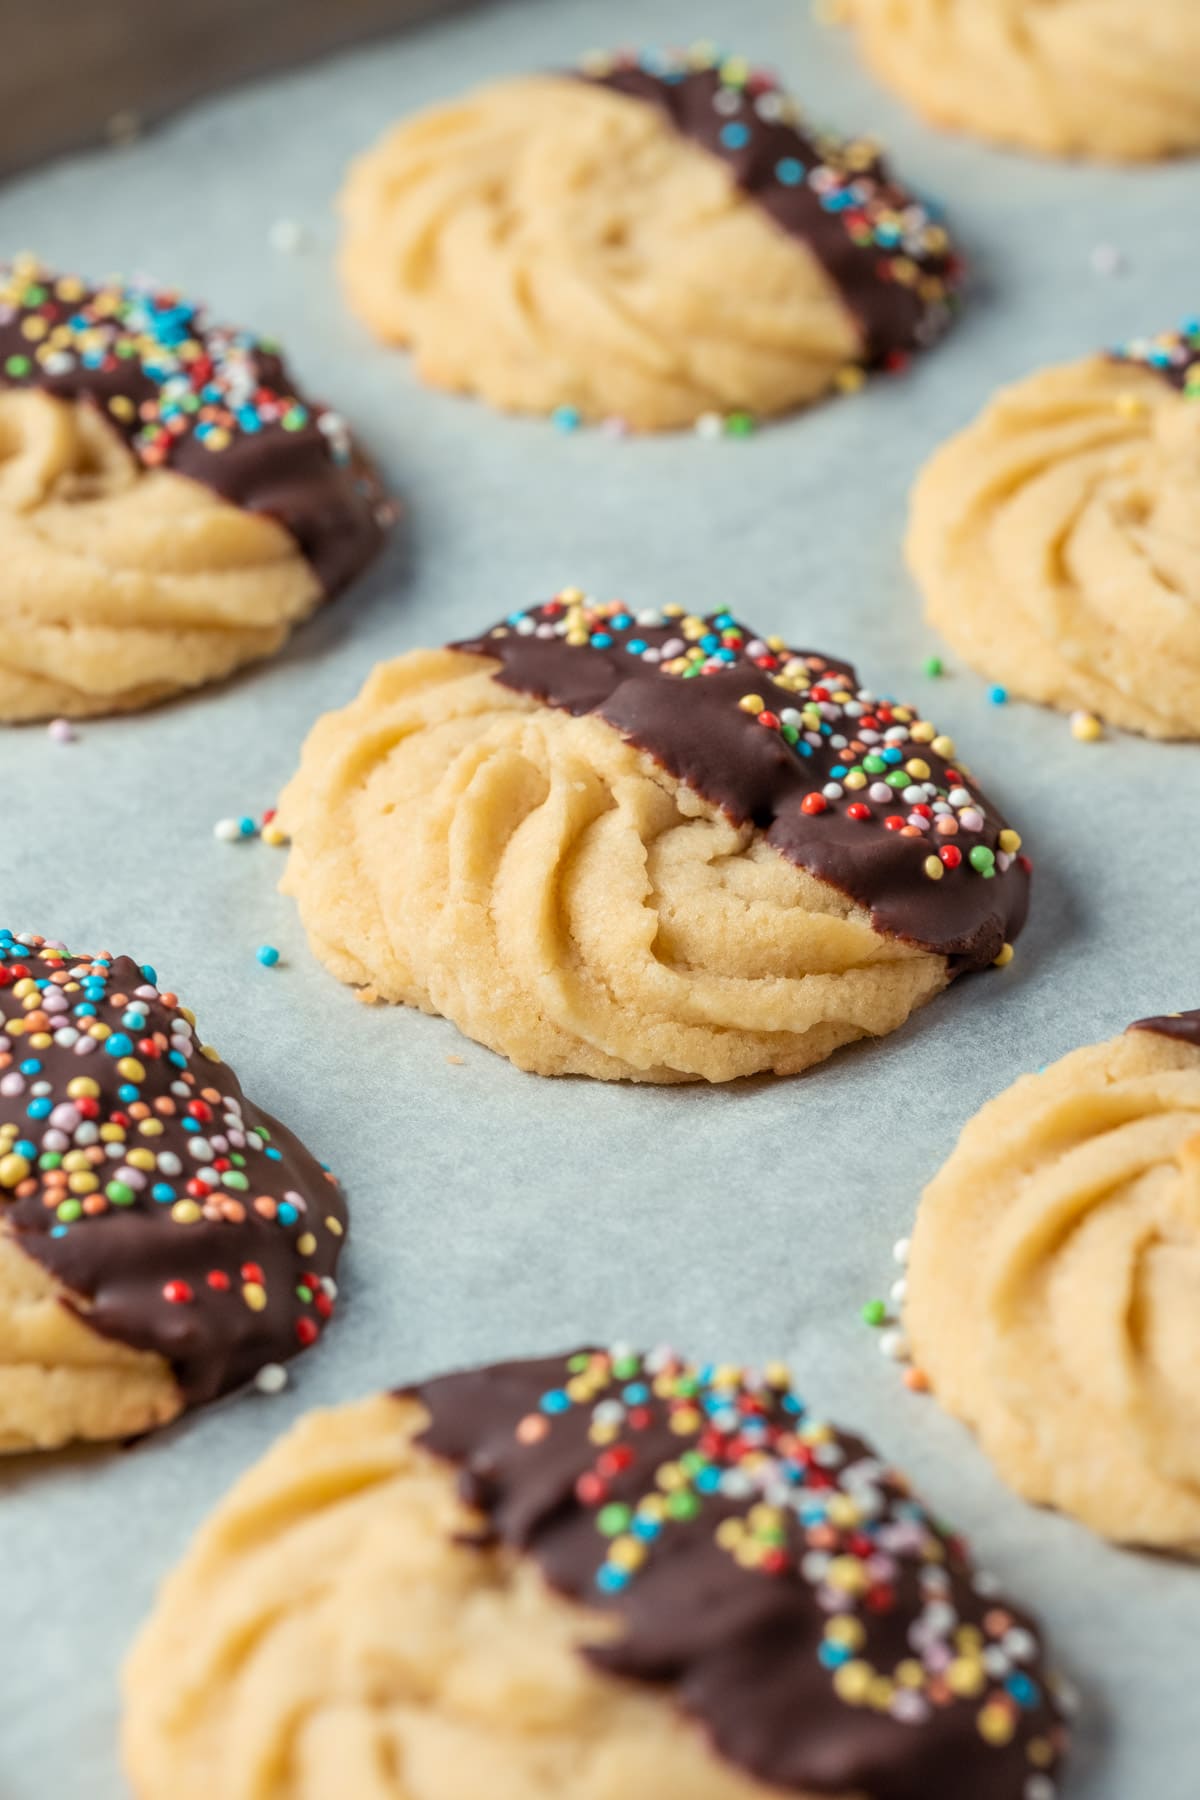 Butter cookies dipped in chocolate and topped with sprinkles on a parchment lined baking tray.